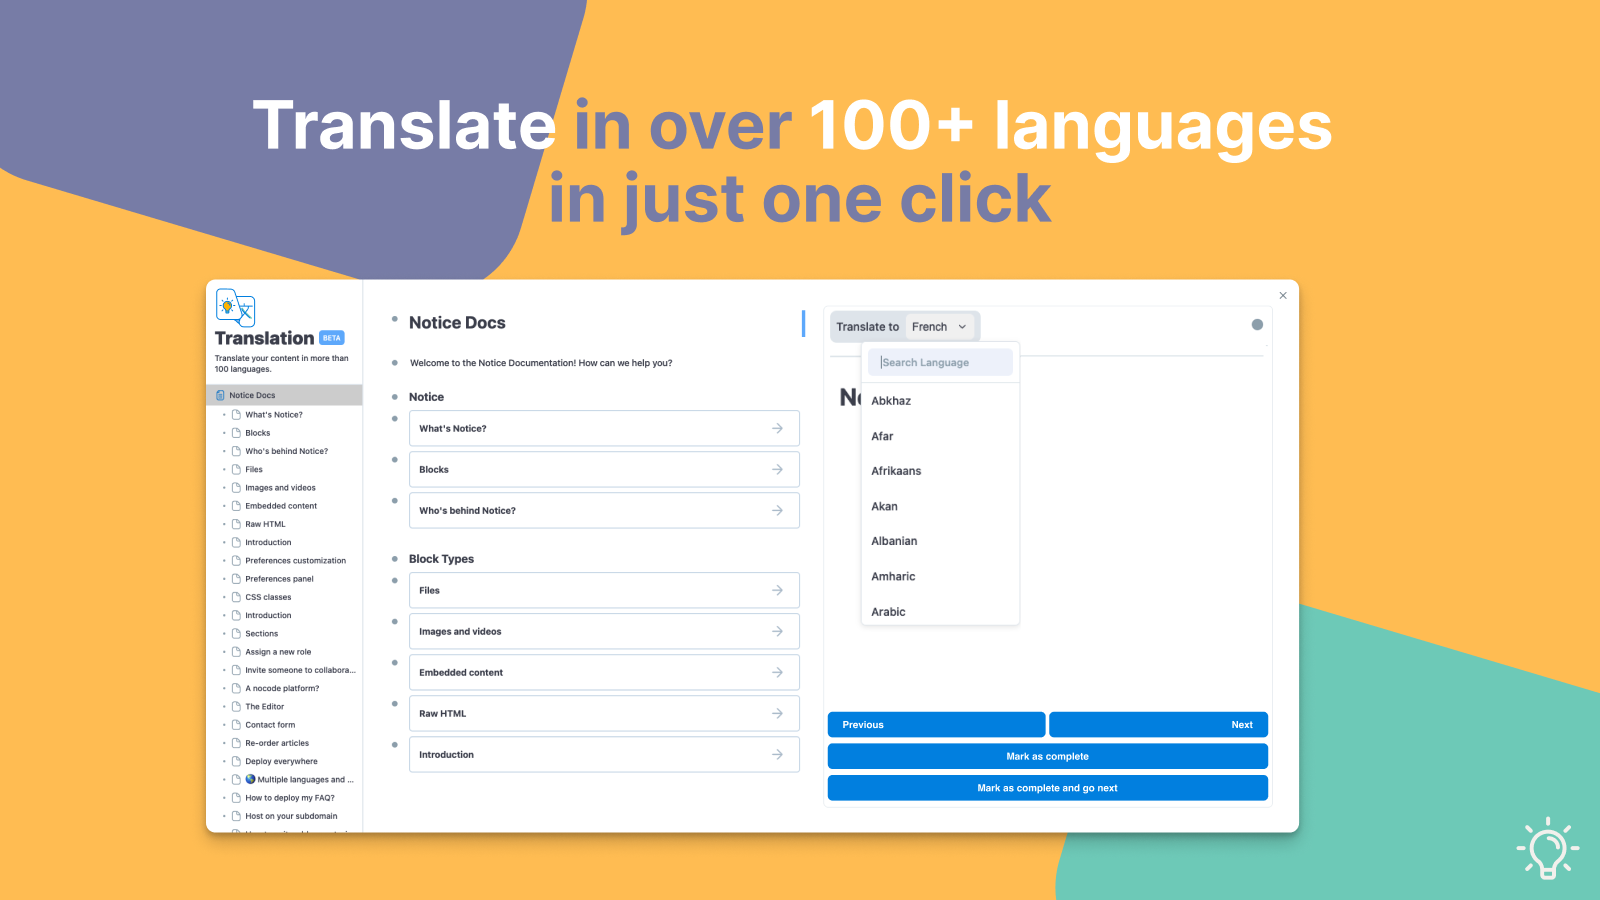 Translate your content in over 100 languages